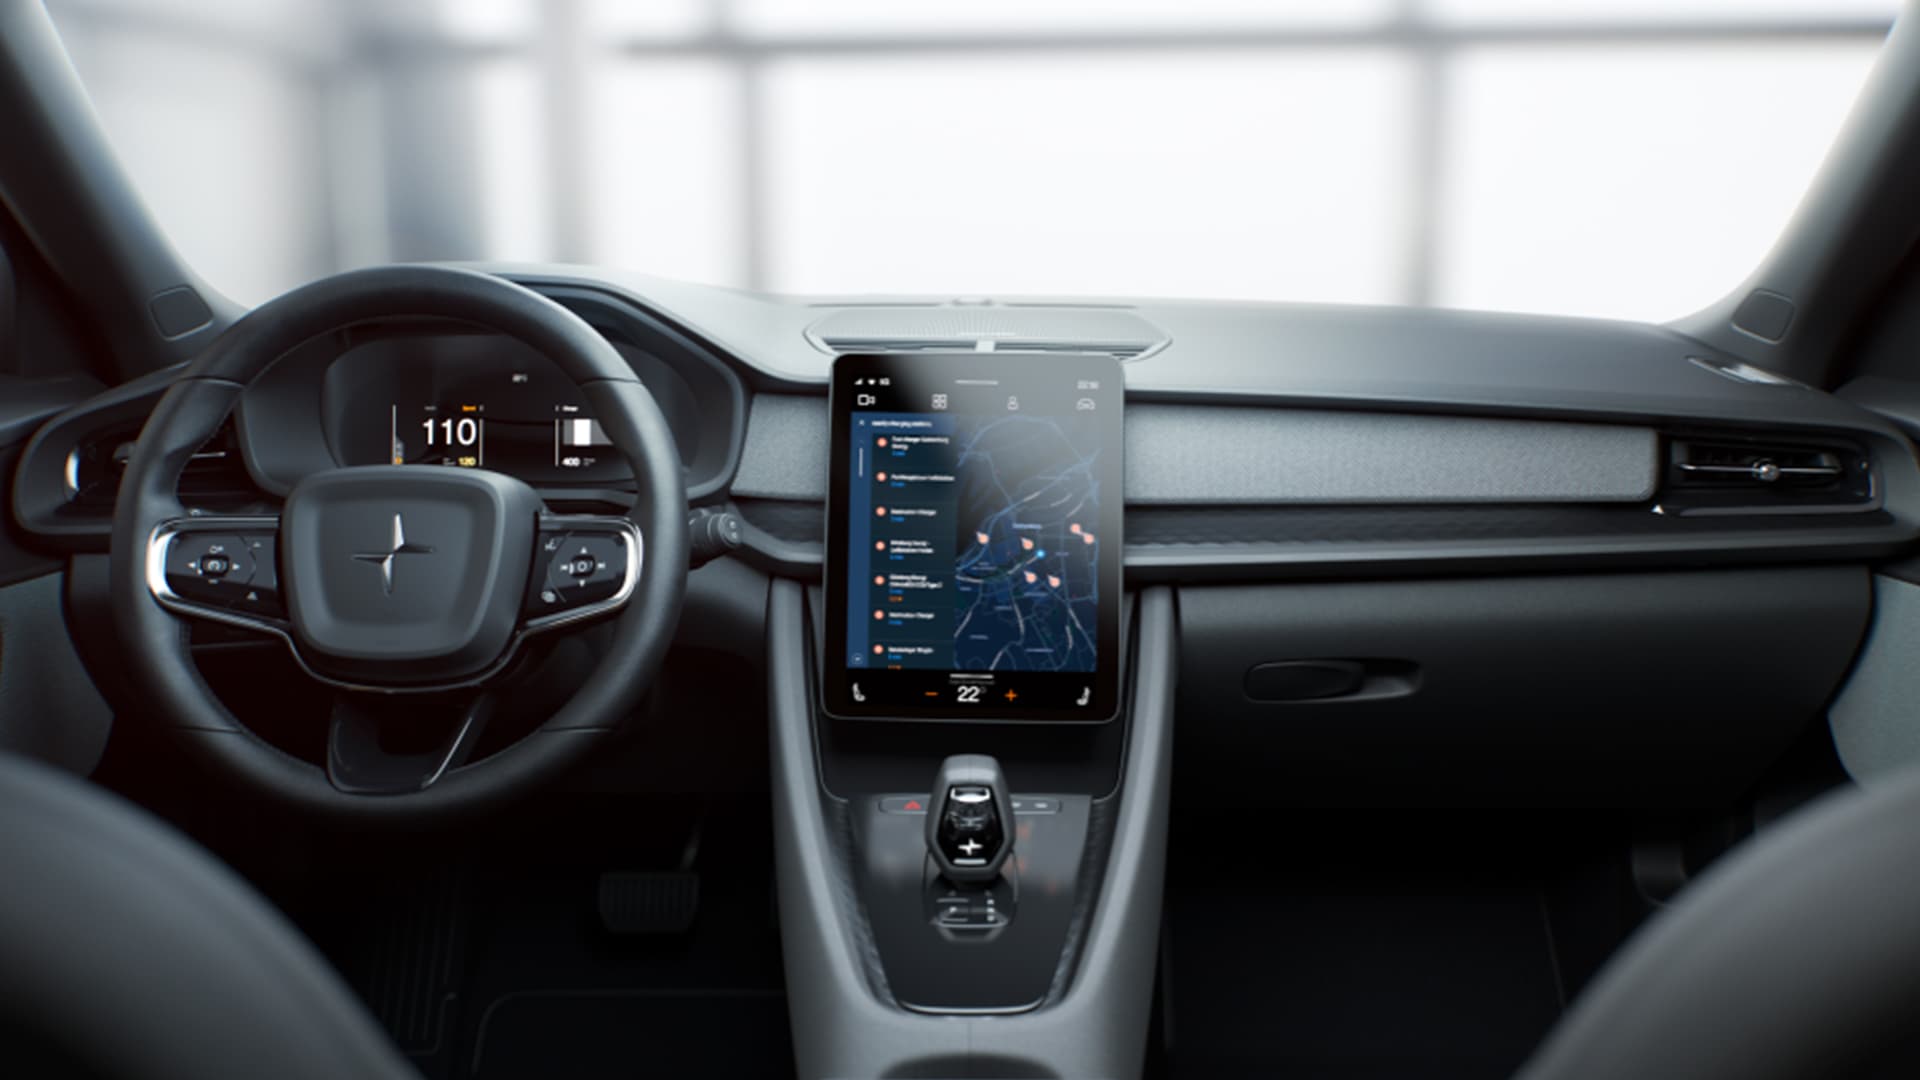 Android Automotive OS in Polestar 2